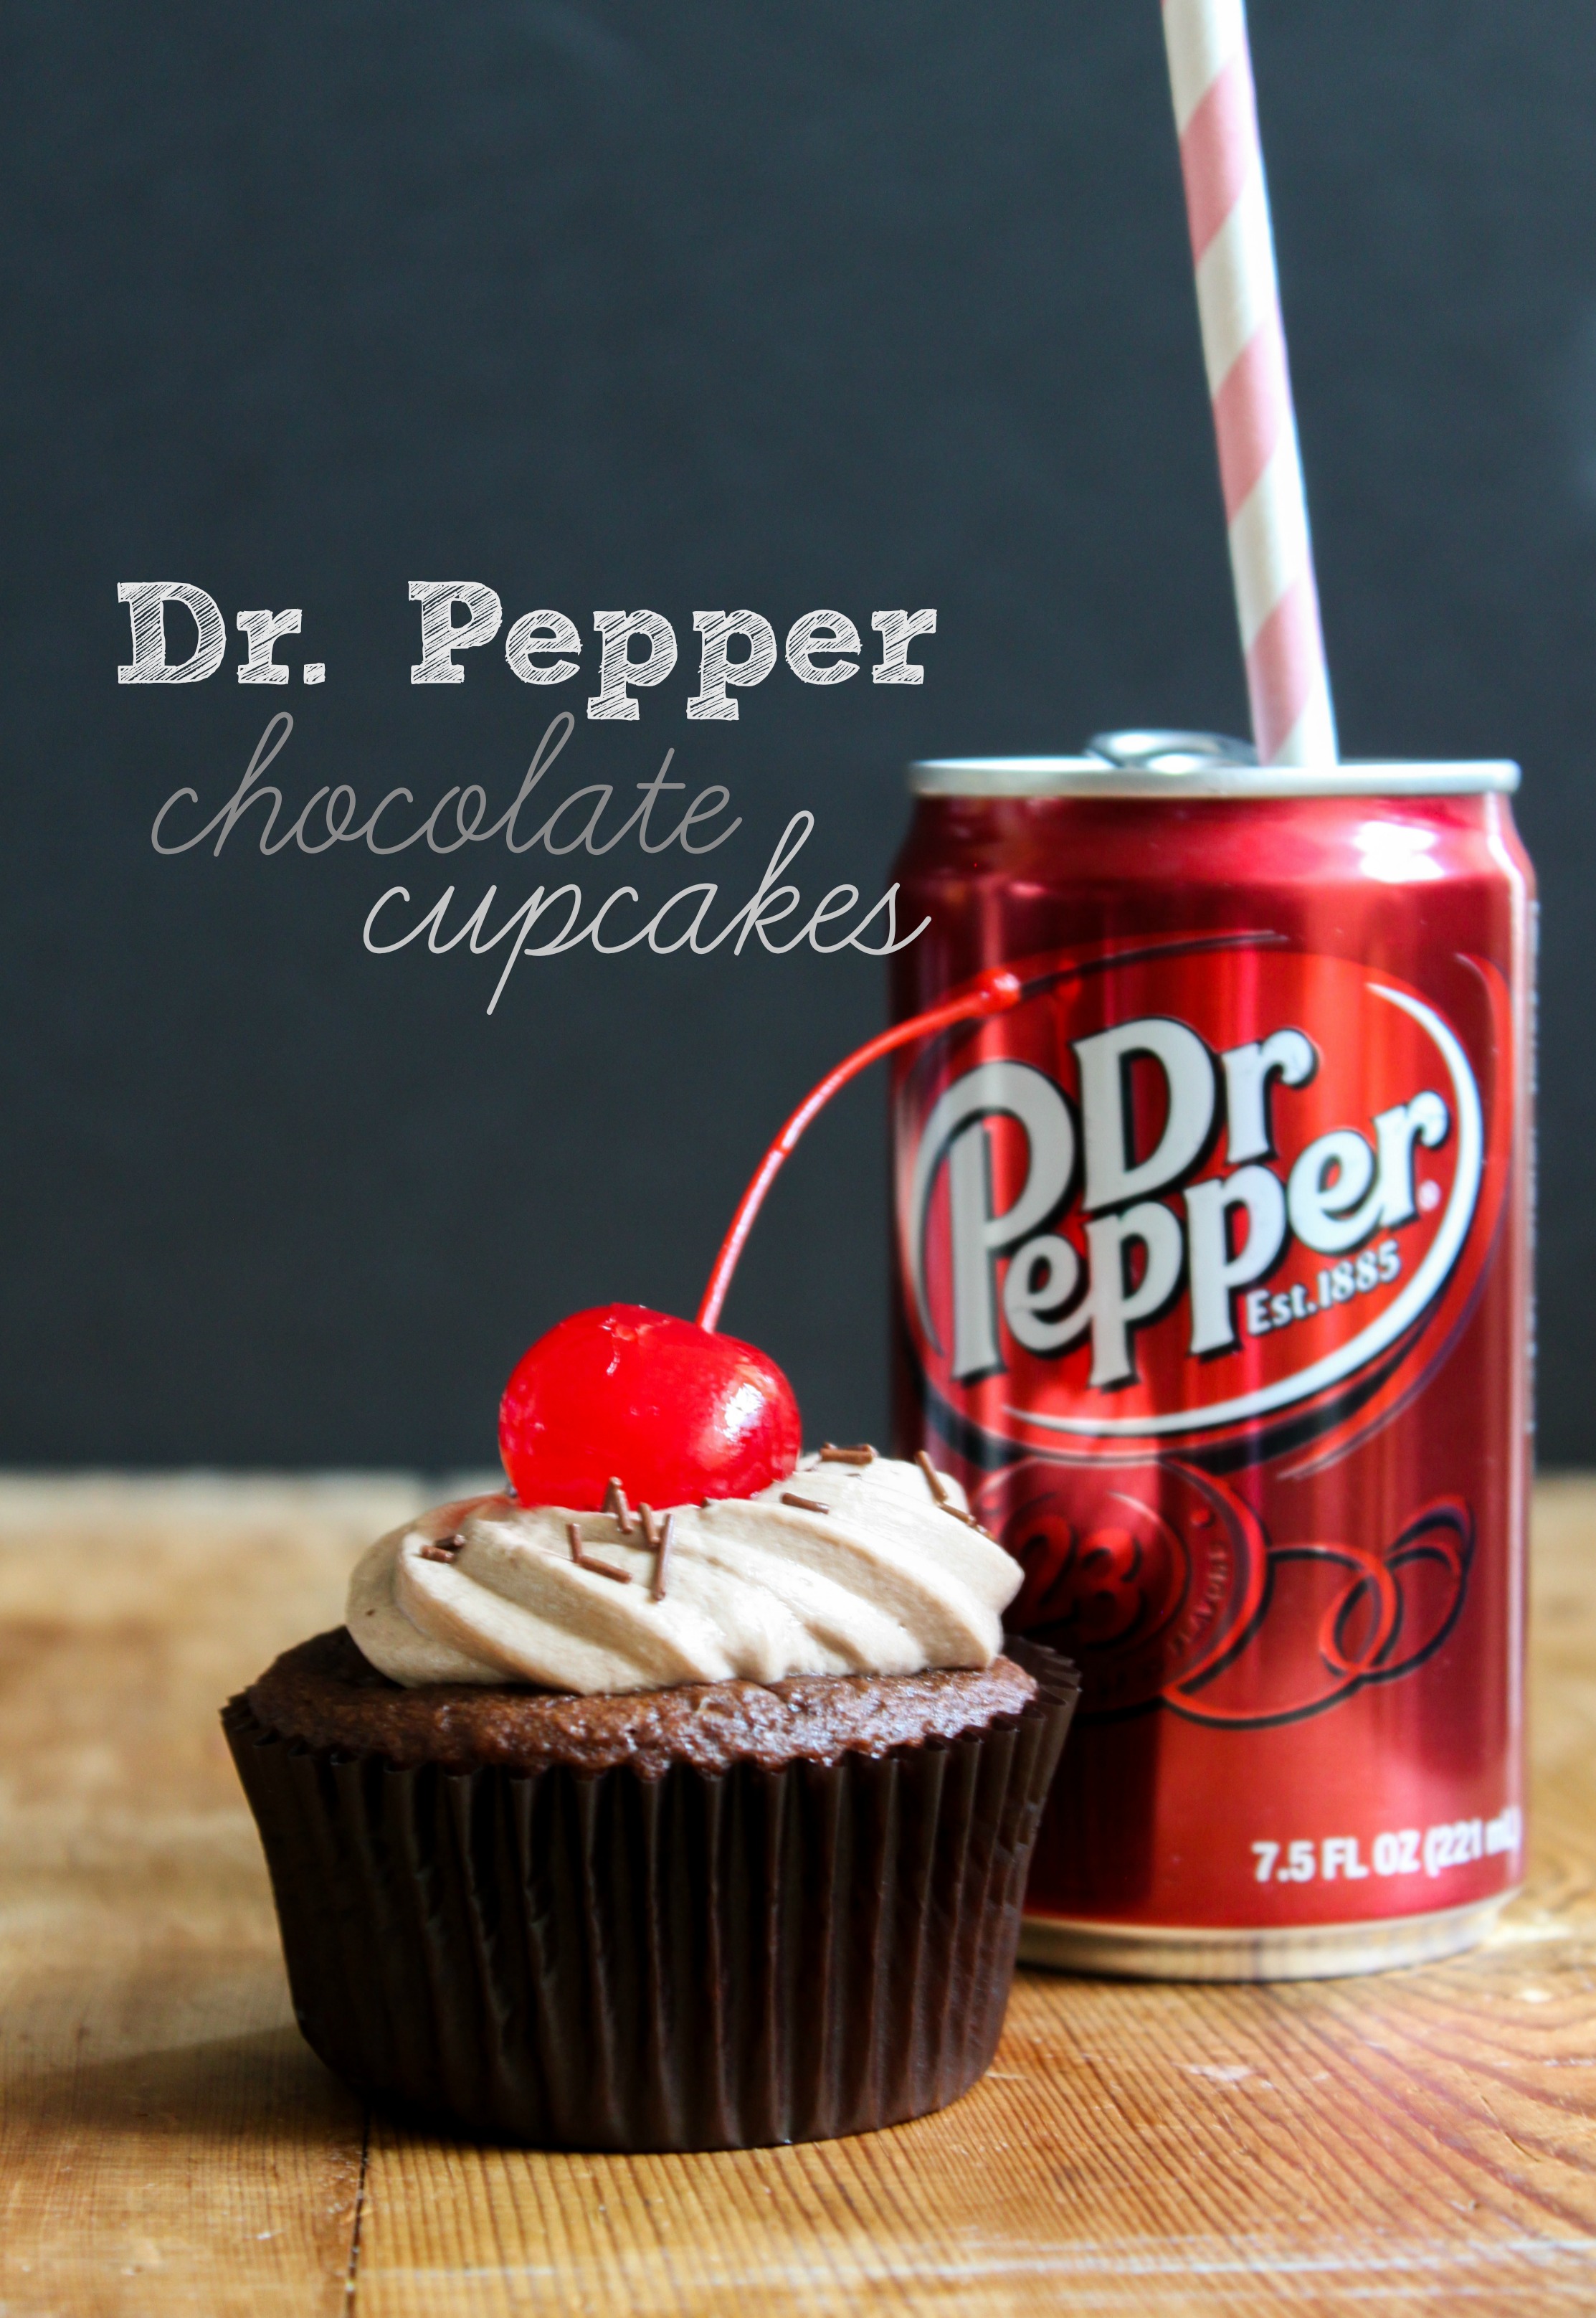 What is Dr. Pepper made of?